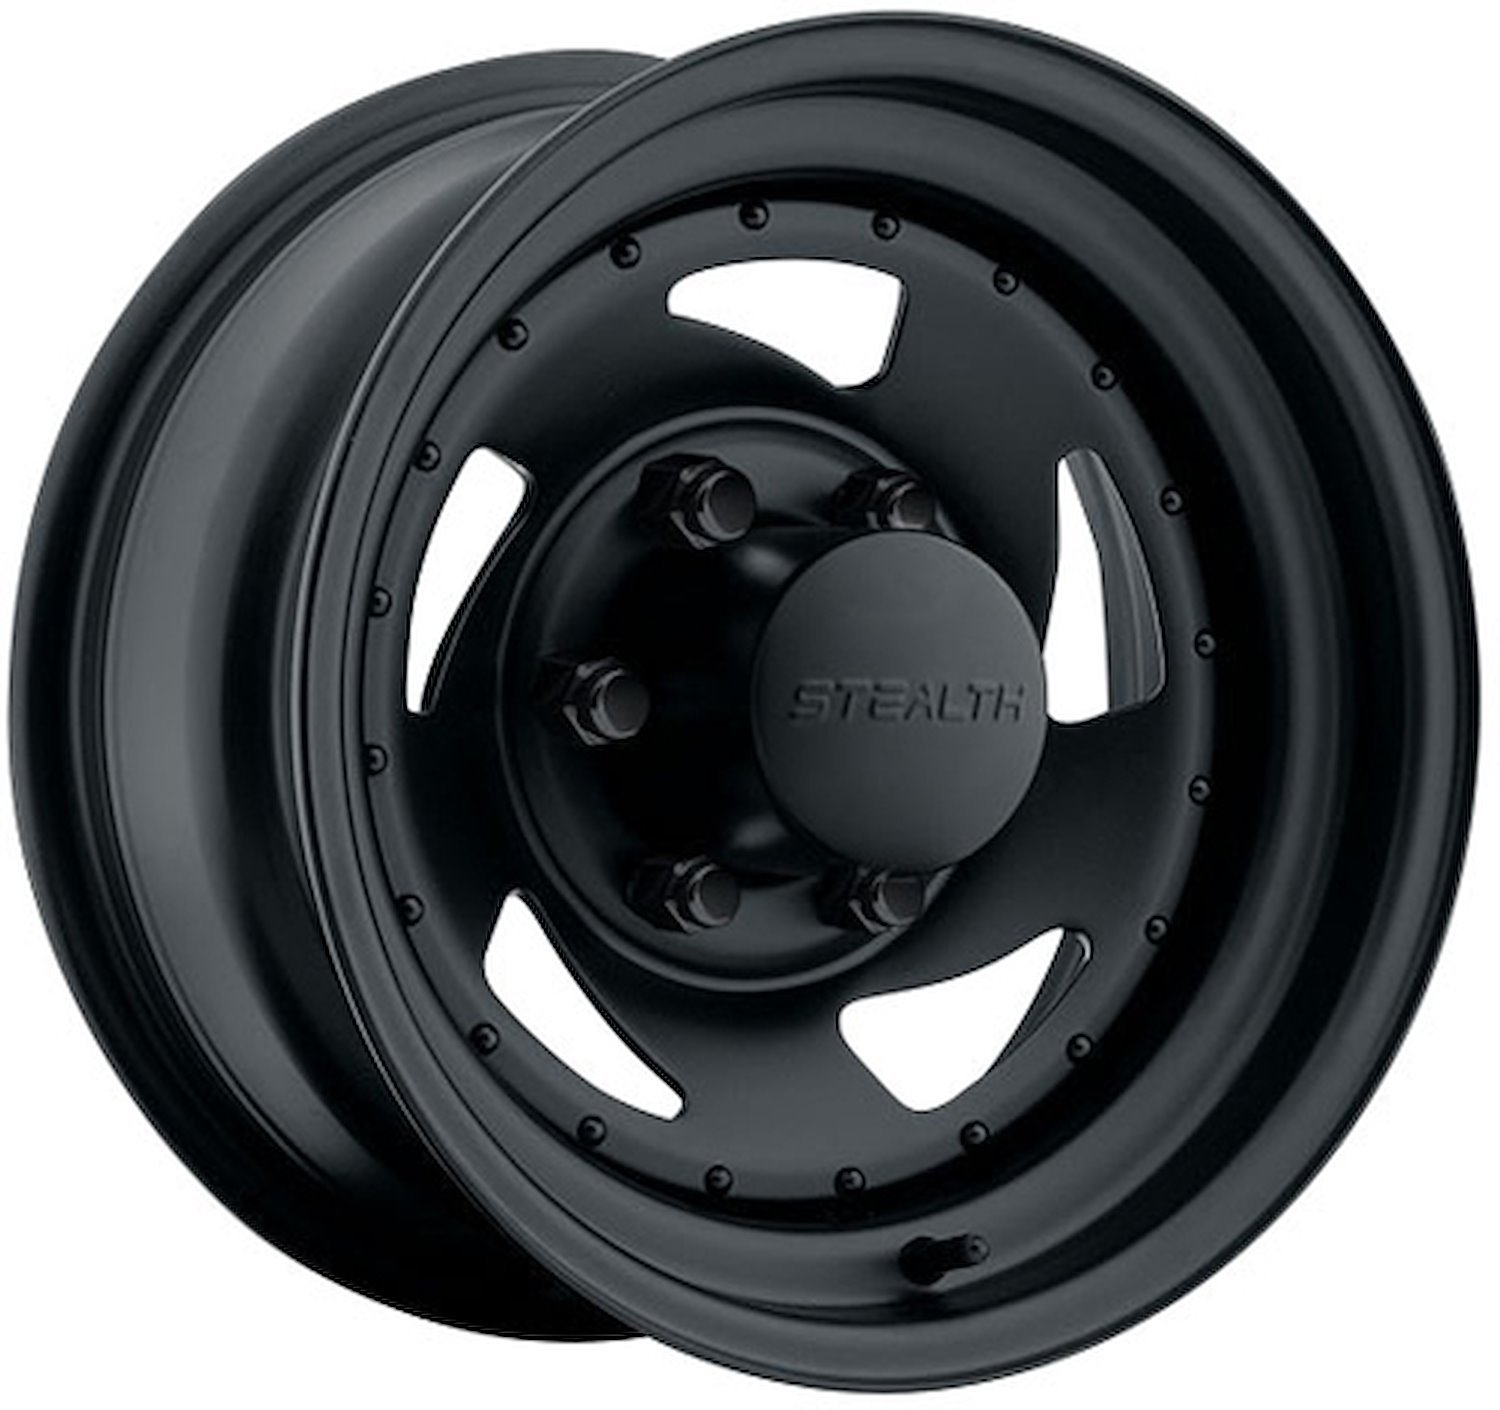 STEALTH BLACK BLADE 16 x 7 8 x 65 Bolt Circle 4 Back Spacing 0 offset 515 Center Bore 2000 lbs Load Rating